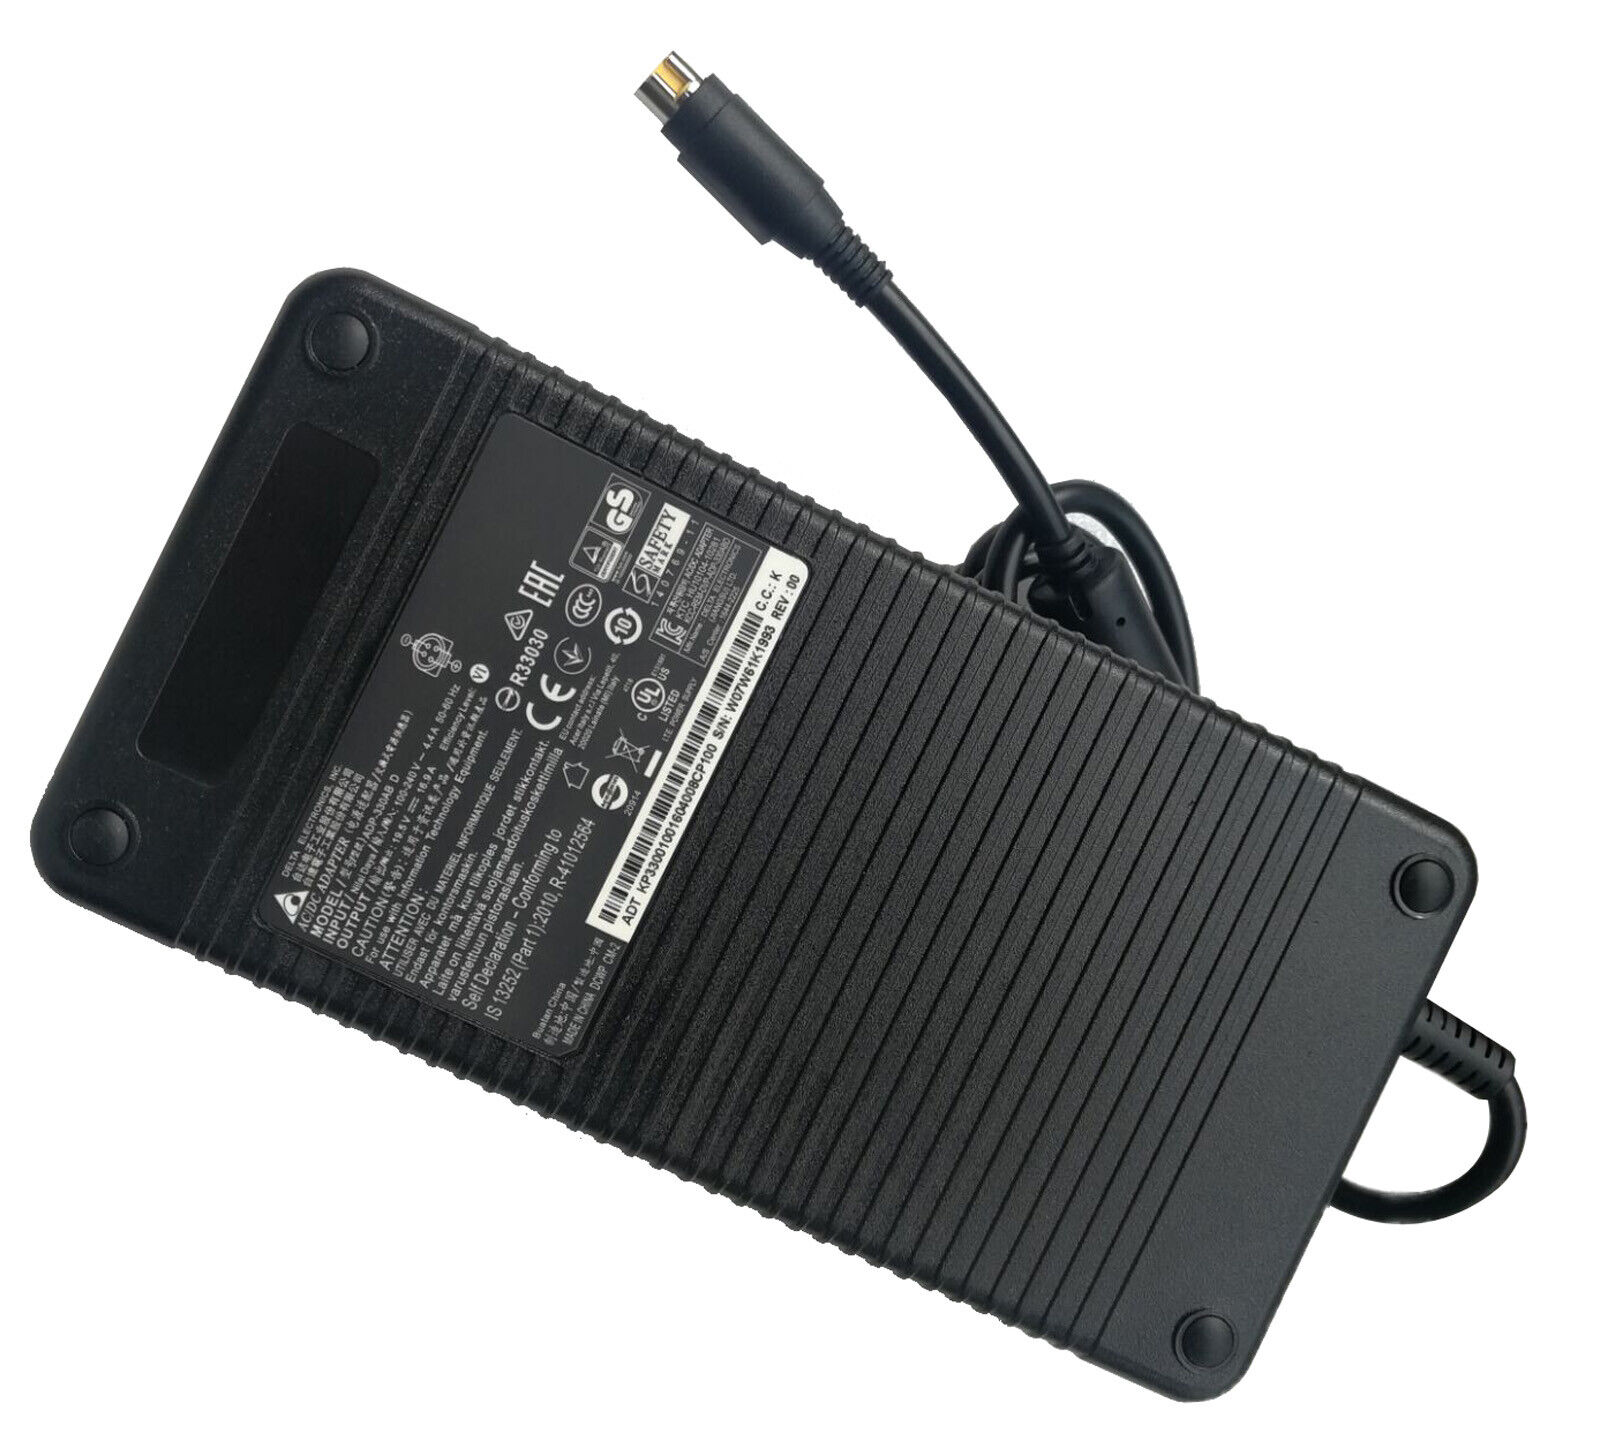 Clevo P870KM1-G P870TM1-G P870 AC Adapter Charger 19.5V 16.9A 330W Power Supply Type: Power Adapter Compatible Brand